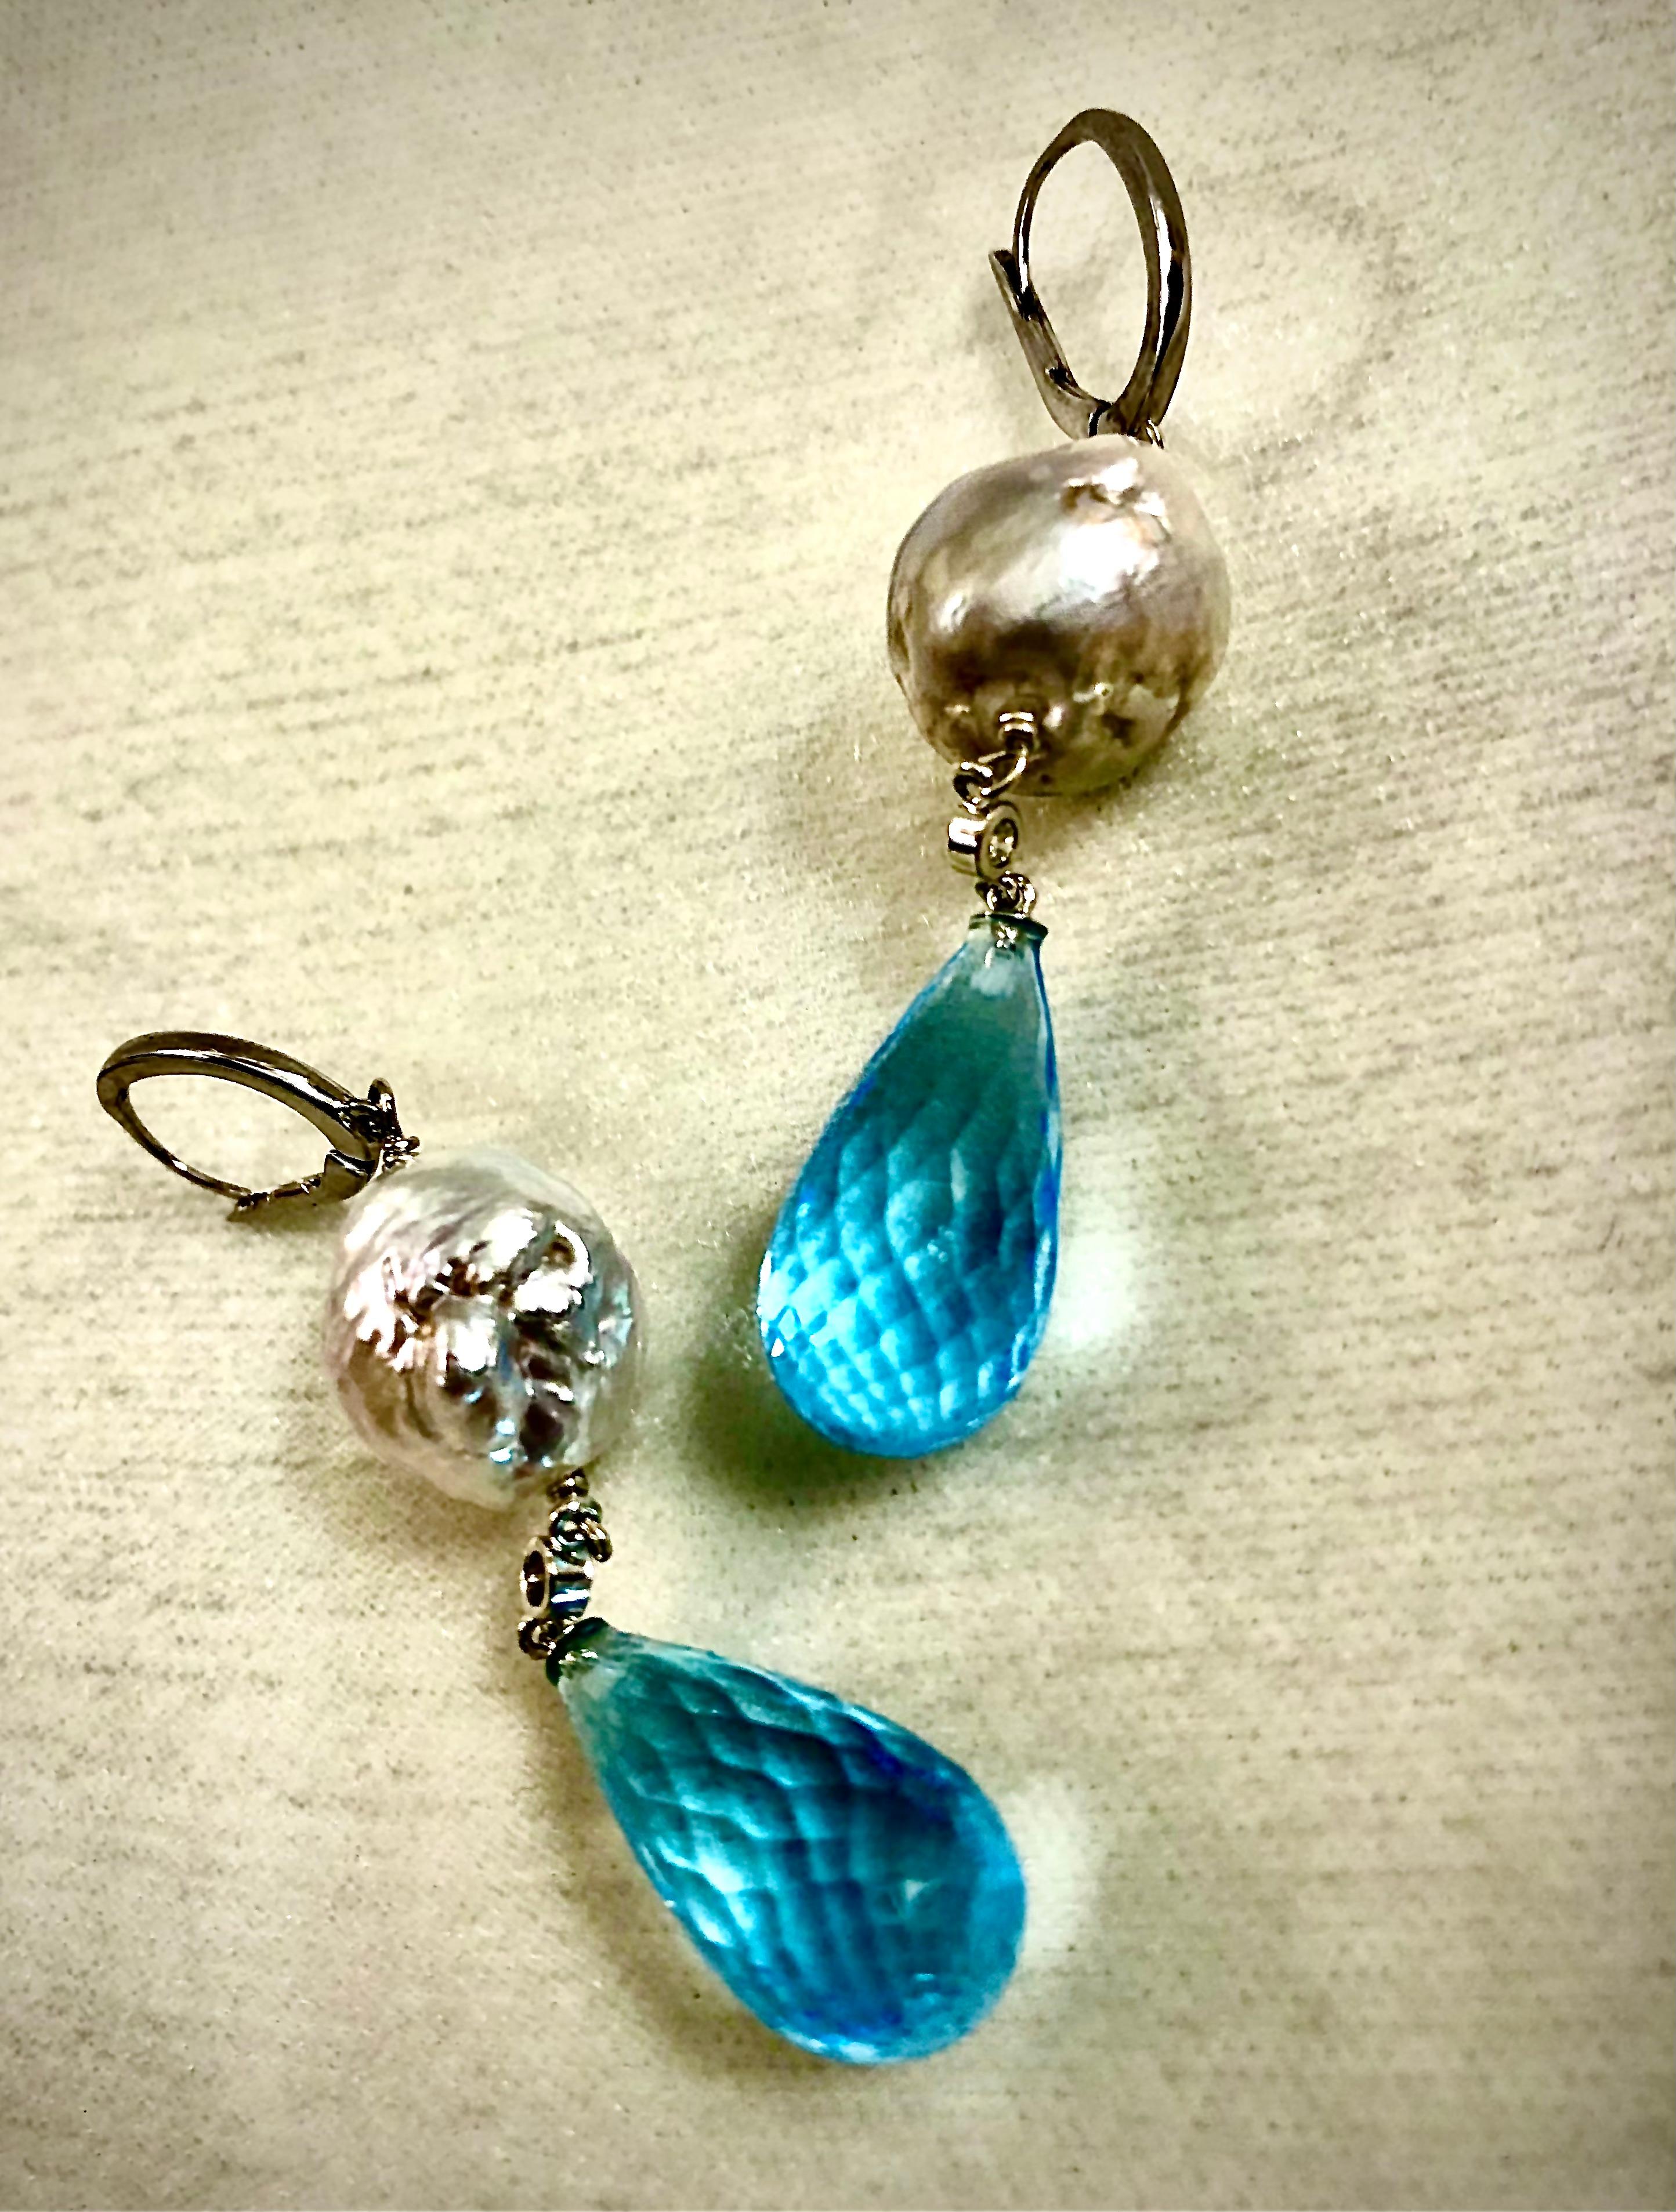 Elegant long earrings in 14kt white gold. A large semi round pale grey baroque freshwater pearl anchors the top of this jewel. Suspended from the pearls is a small bezel set from hangs a large, faceted teardrop shaped sky-blue topaz. The are